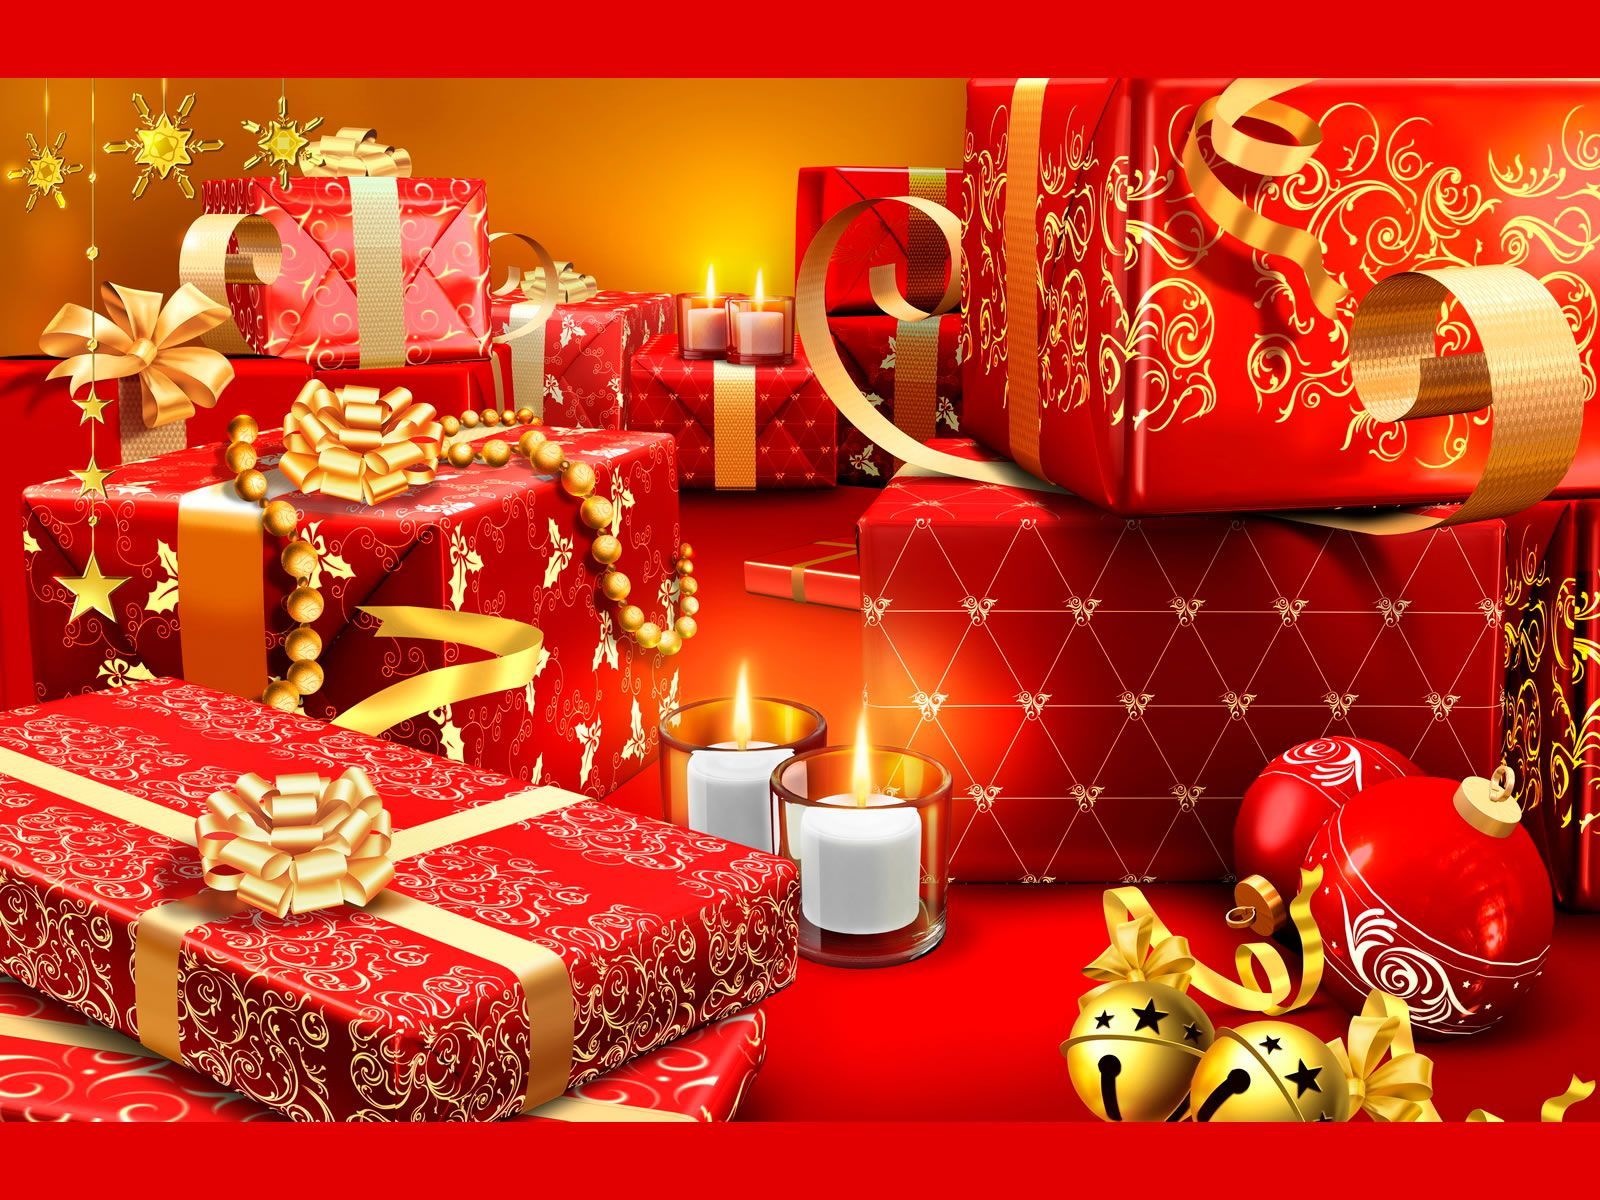 merry-christmas-day-gift-clip-art-library